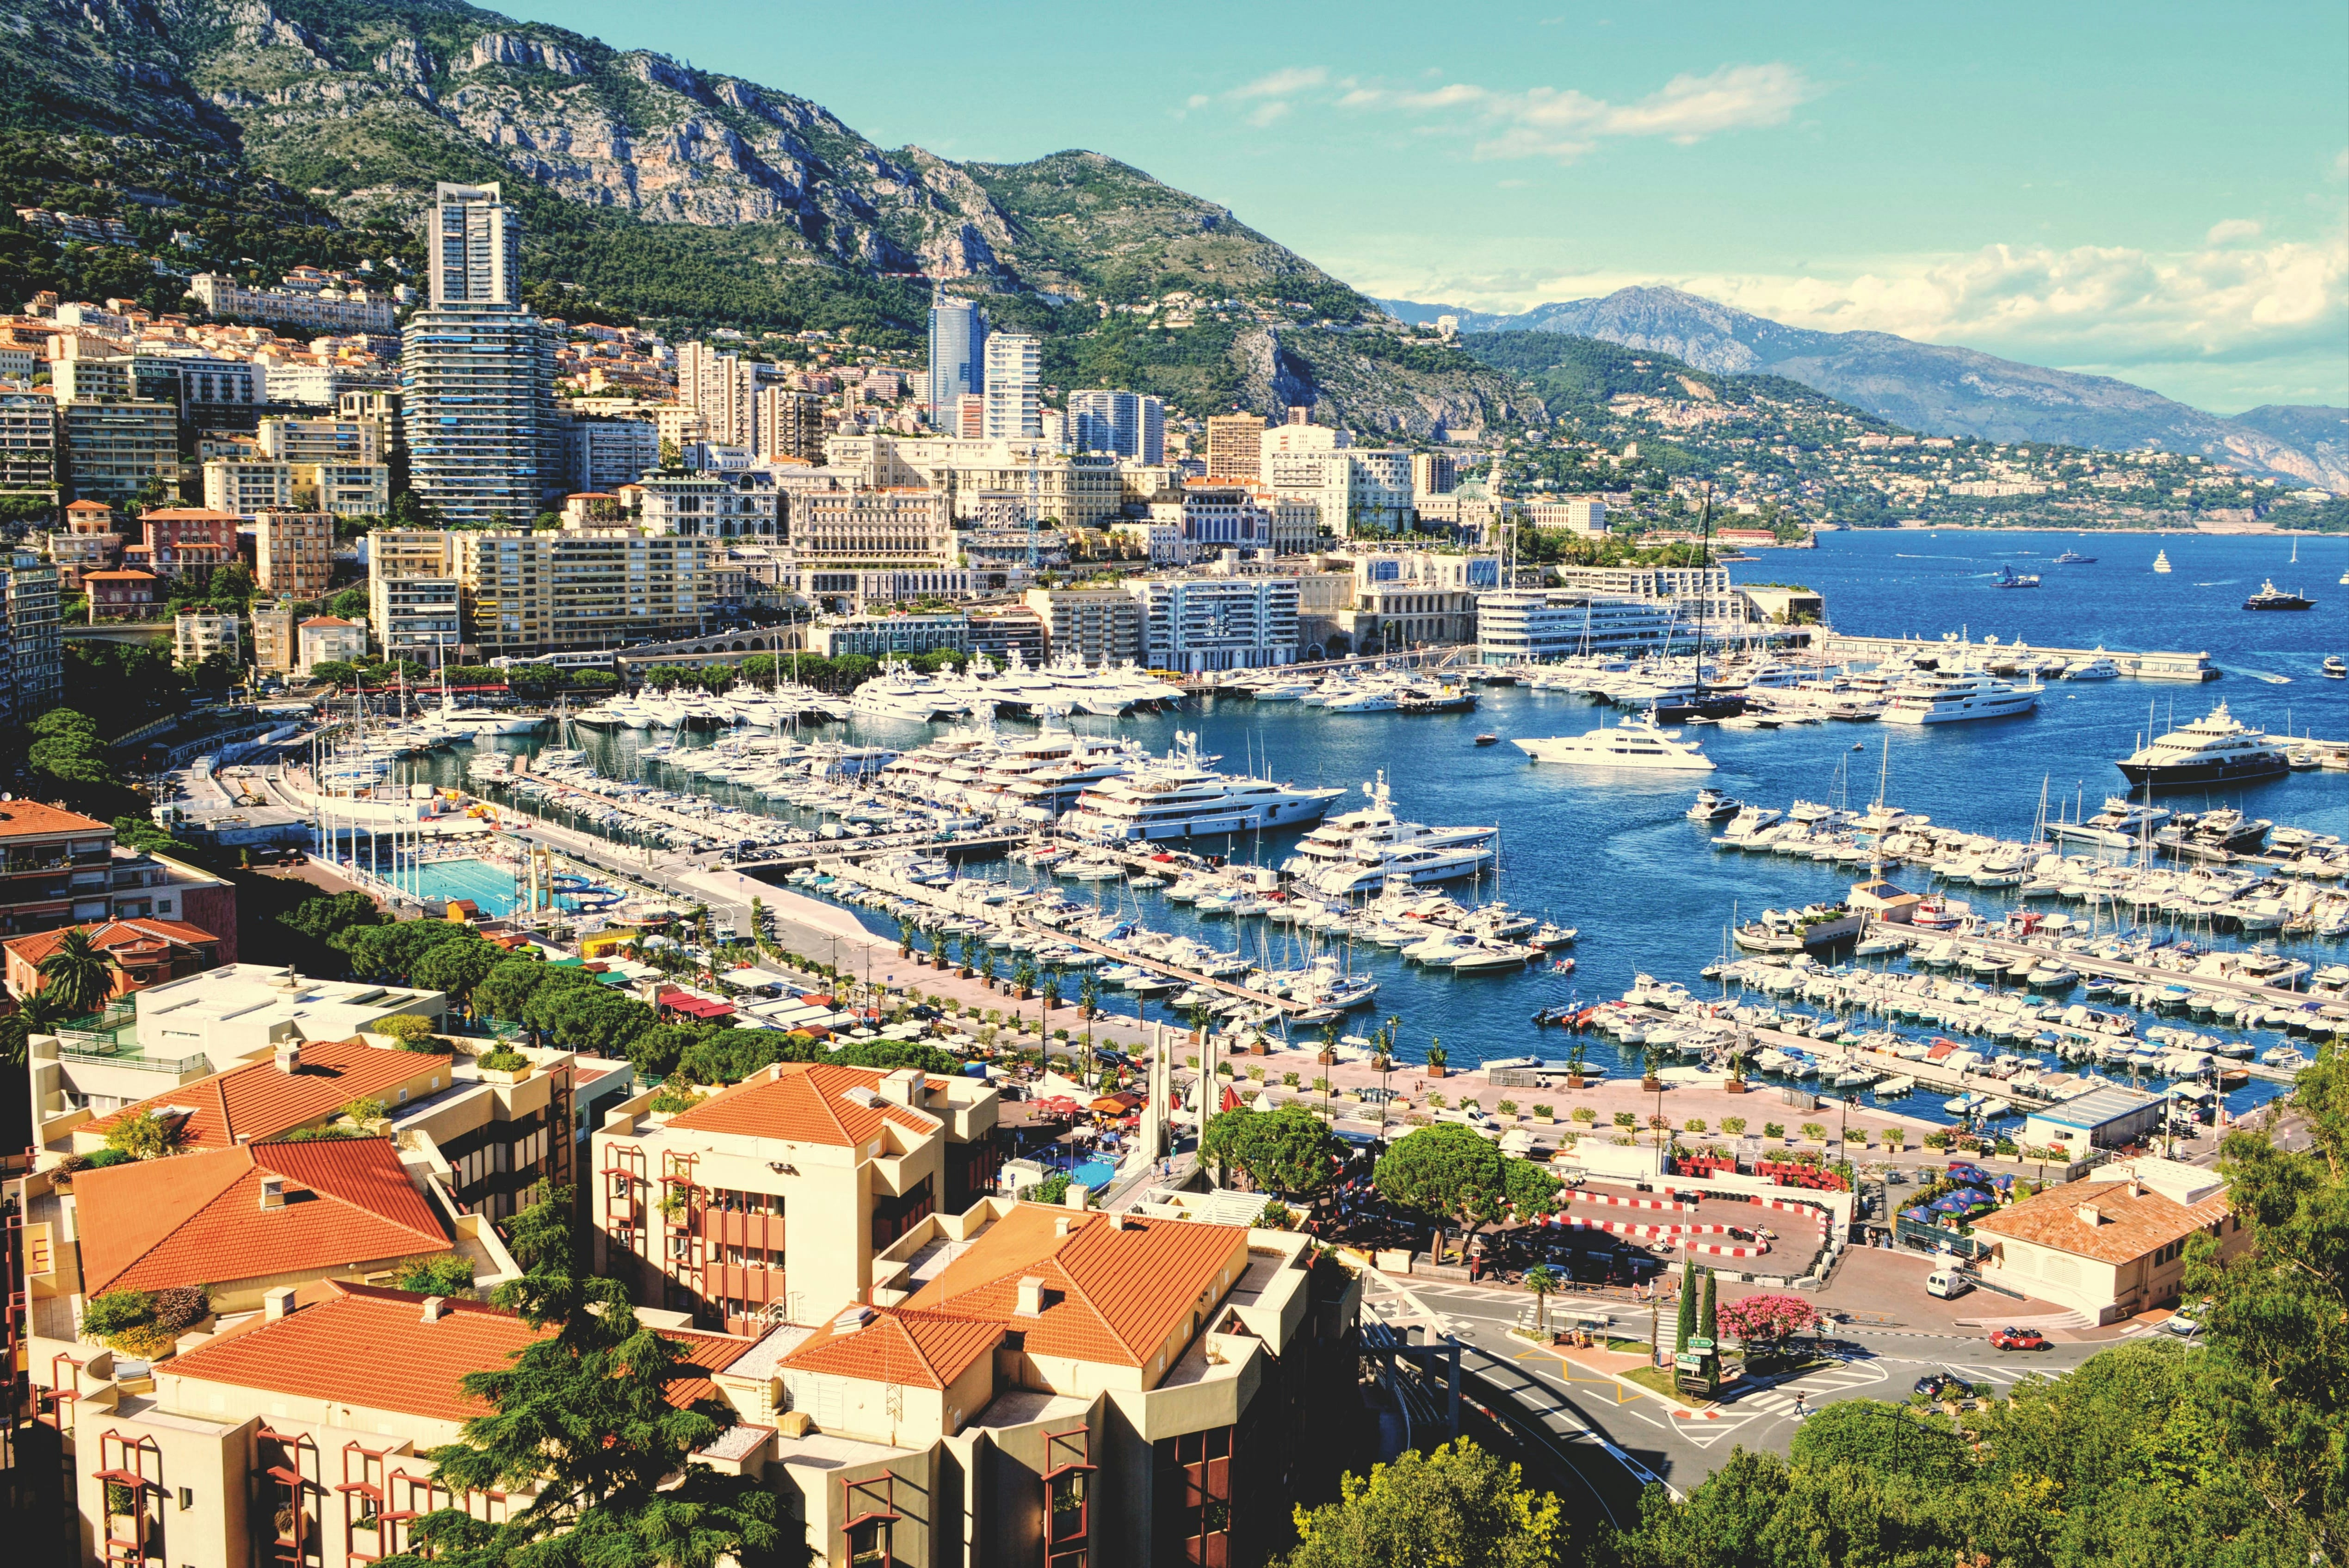 One of the best things about Monaco is that it is so walkable